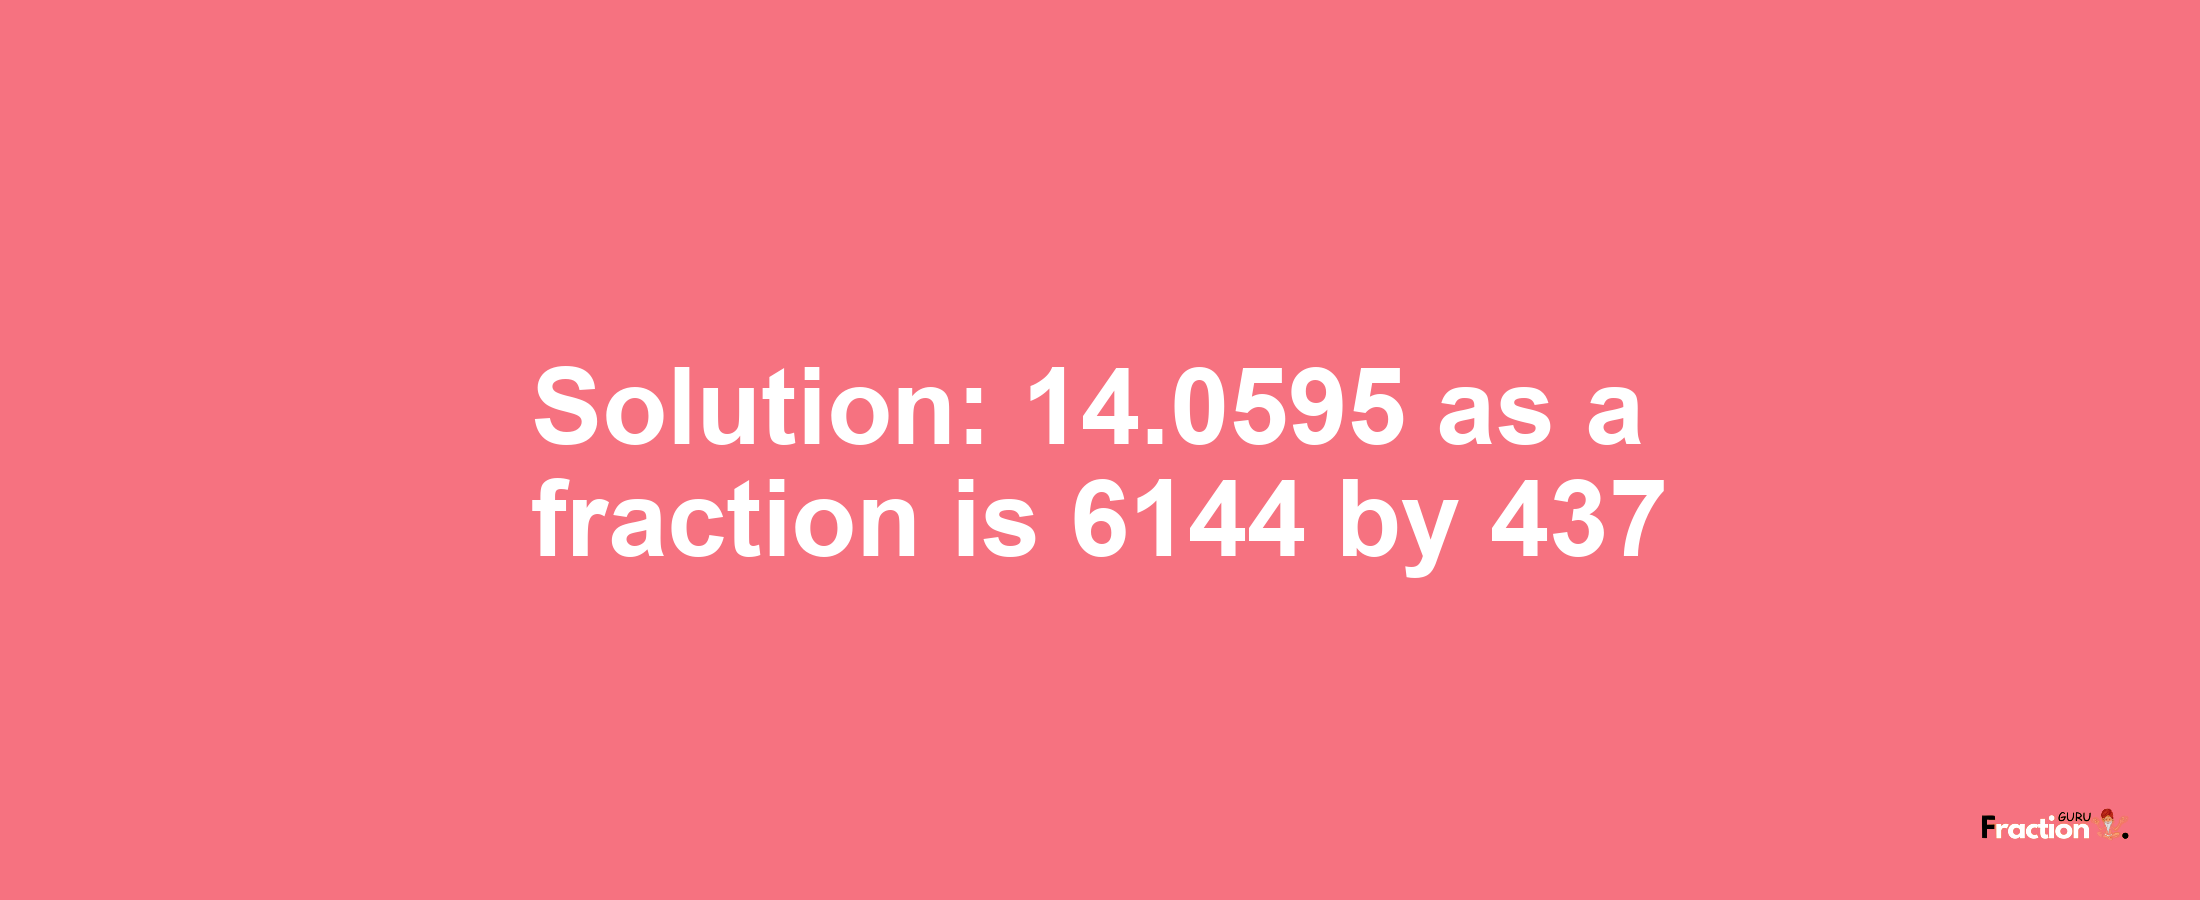 Solution:14.0595 as a fraction is 6144/437